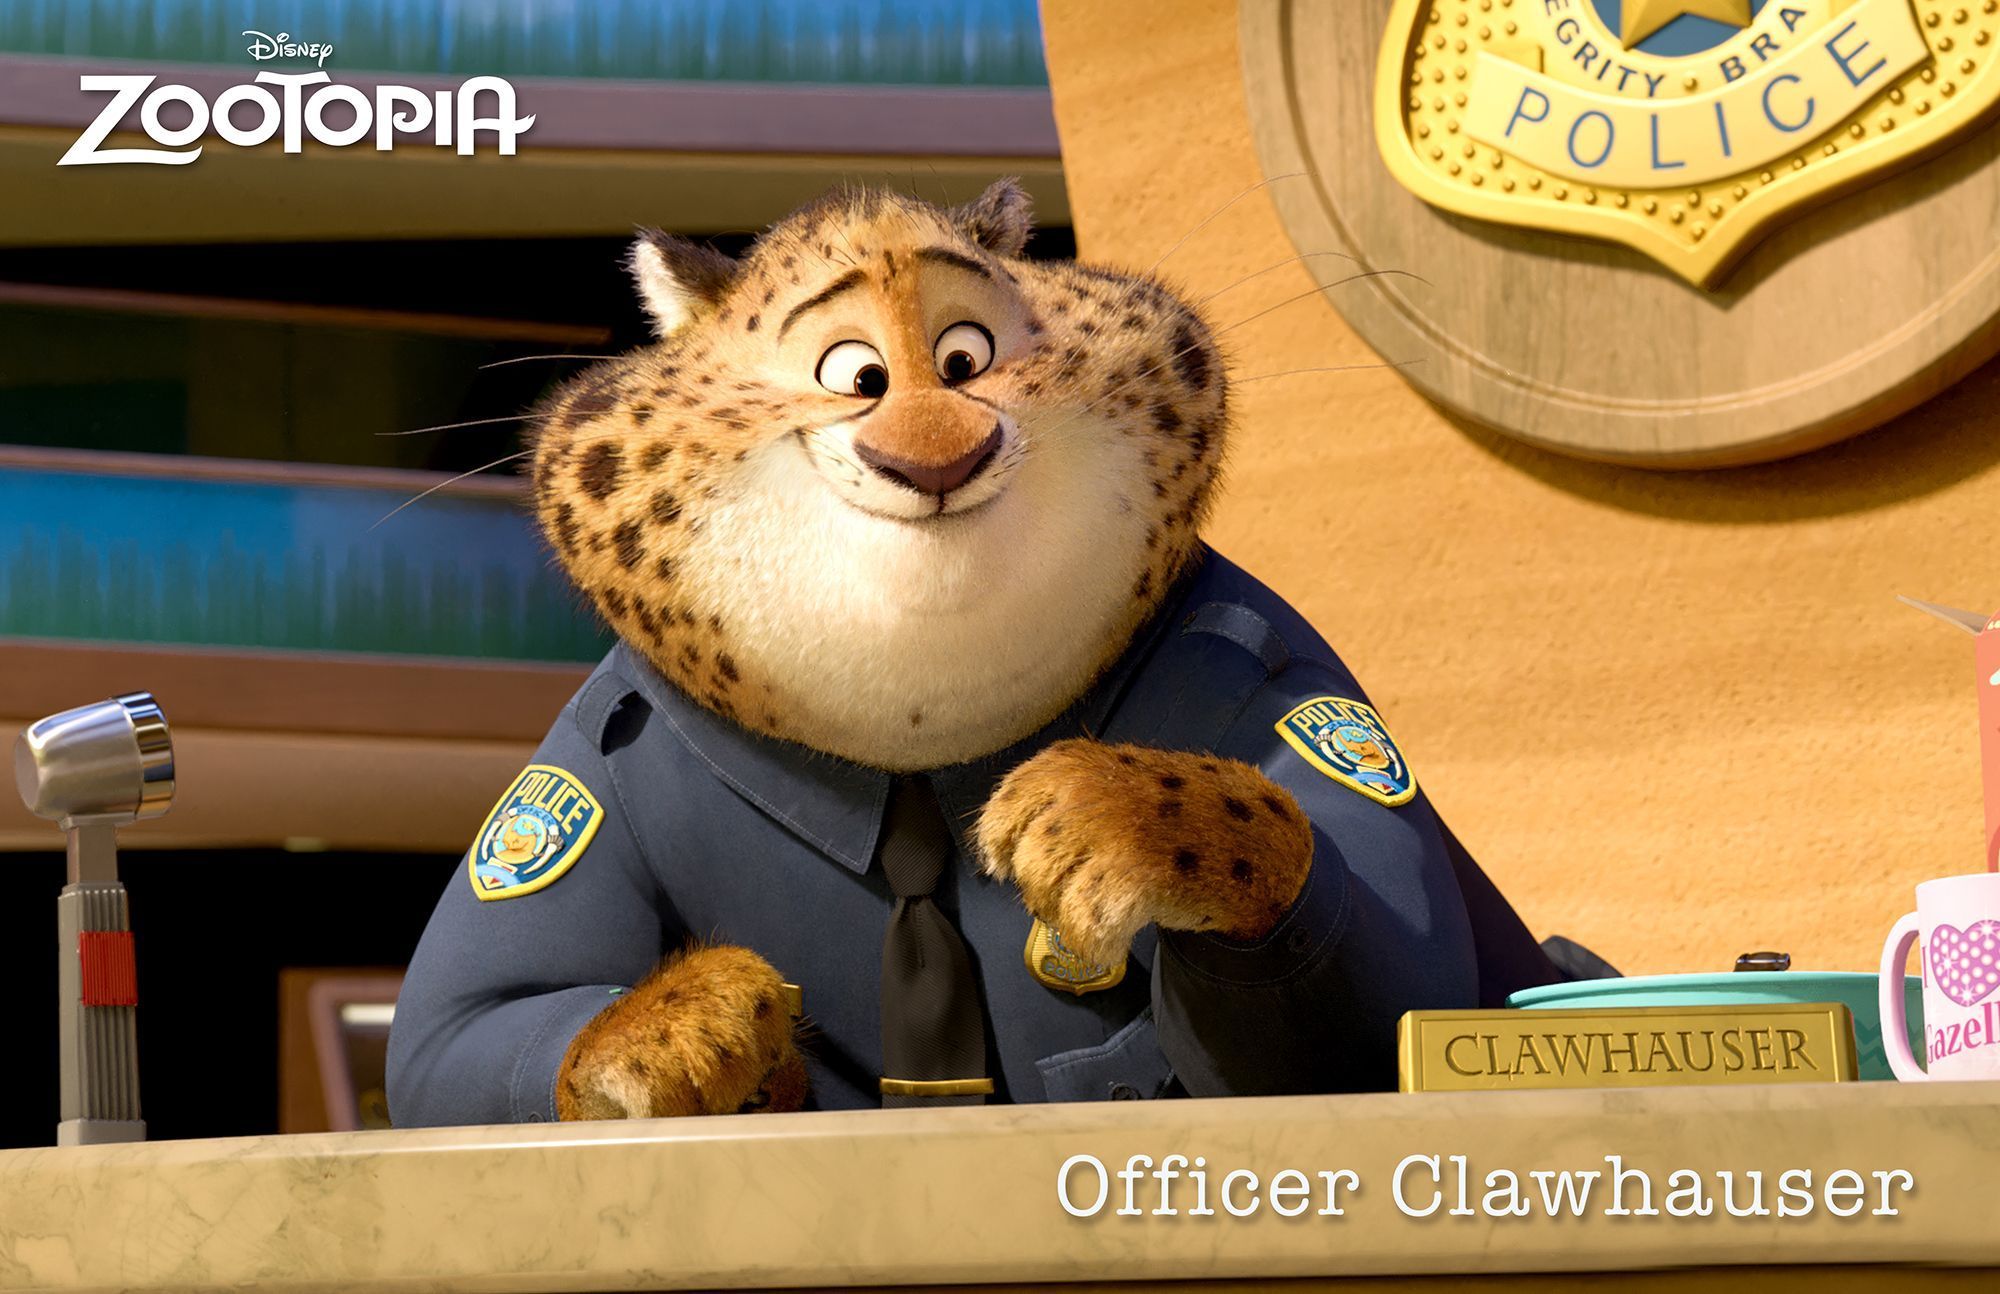 Zootopia 340817 Gallery, Images, Posters, Wallpapers and Stills